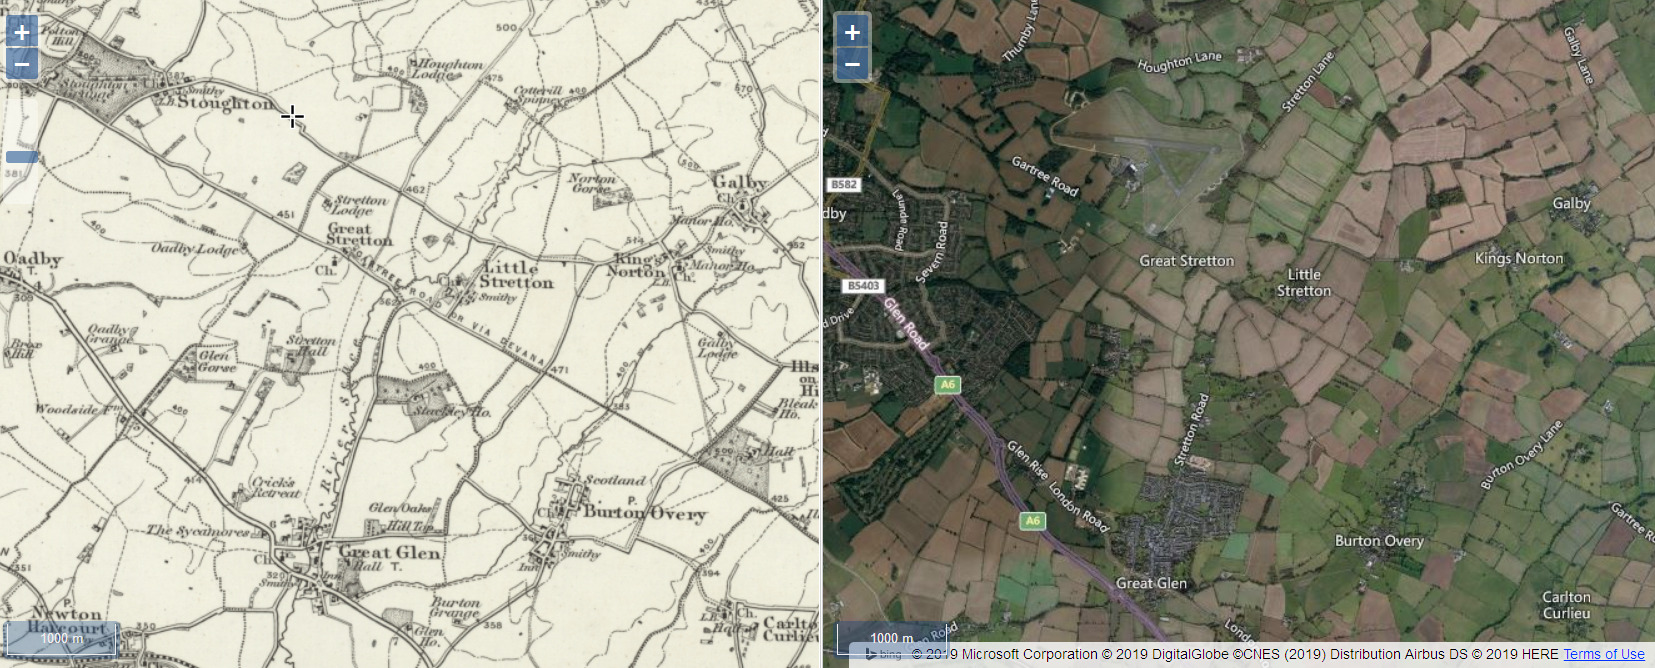 Screenshot_2019-07-08 Side by side georeferenced maps viewer - Map images - National Library o...jpg